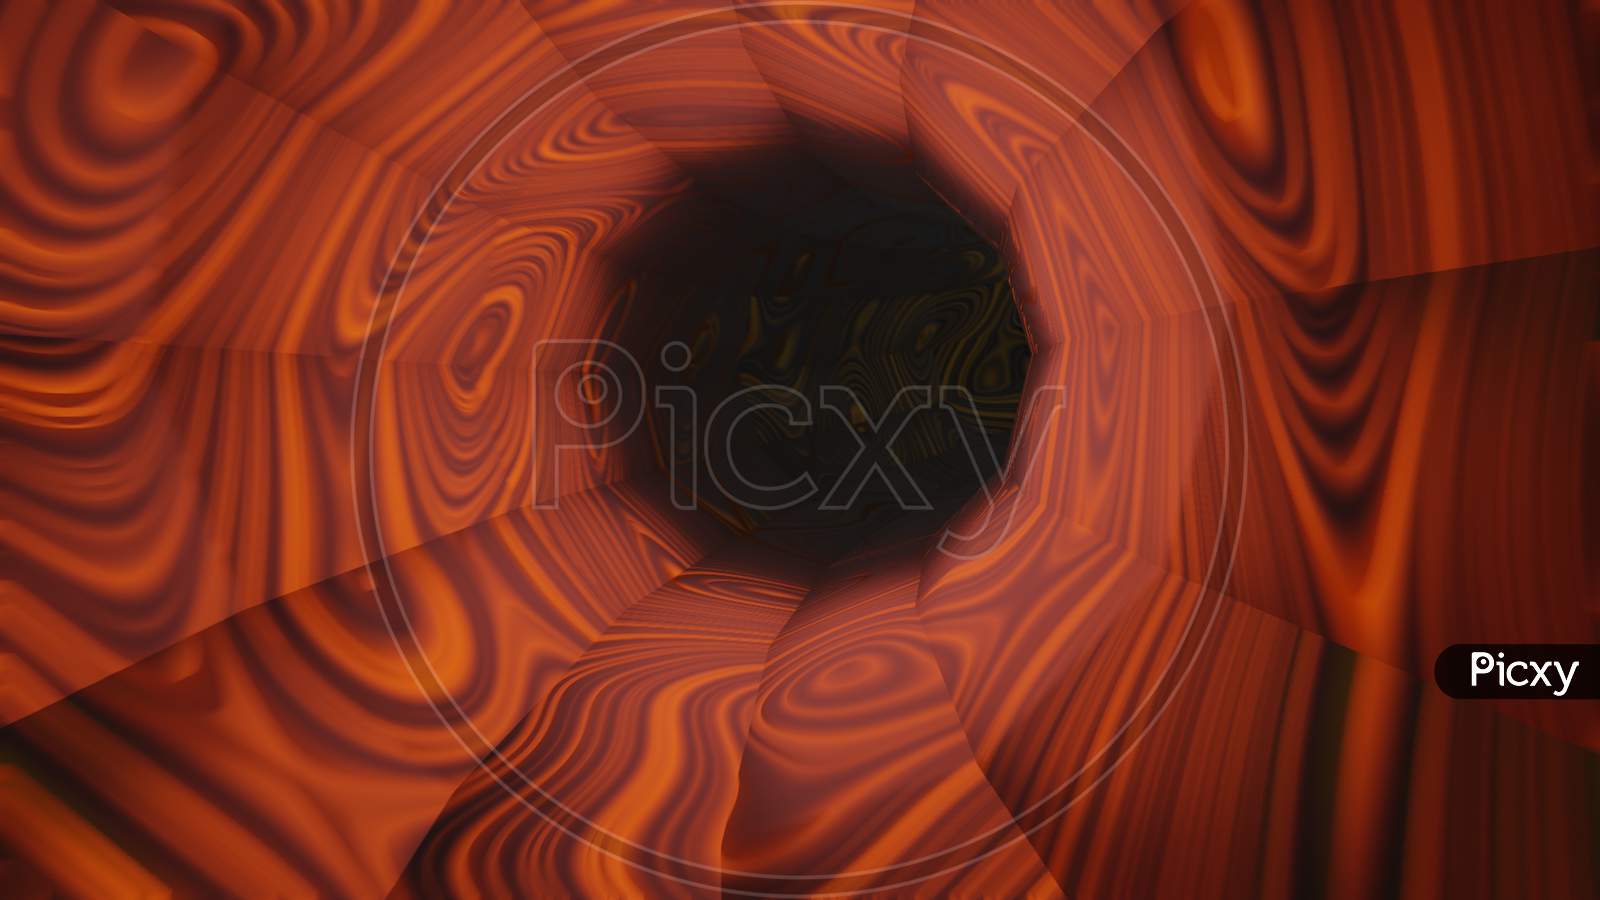 3D Illustration Graphic Of A Tunnel Or Cave, Which Has Beautiful Texture Or Pattern.